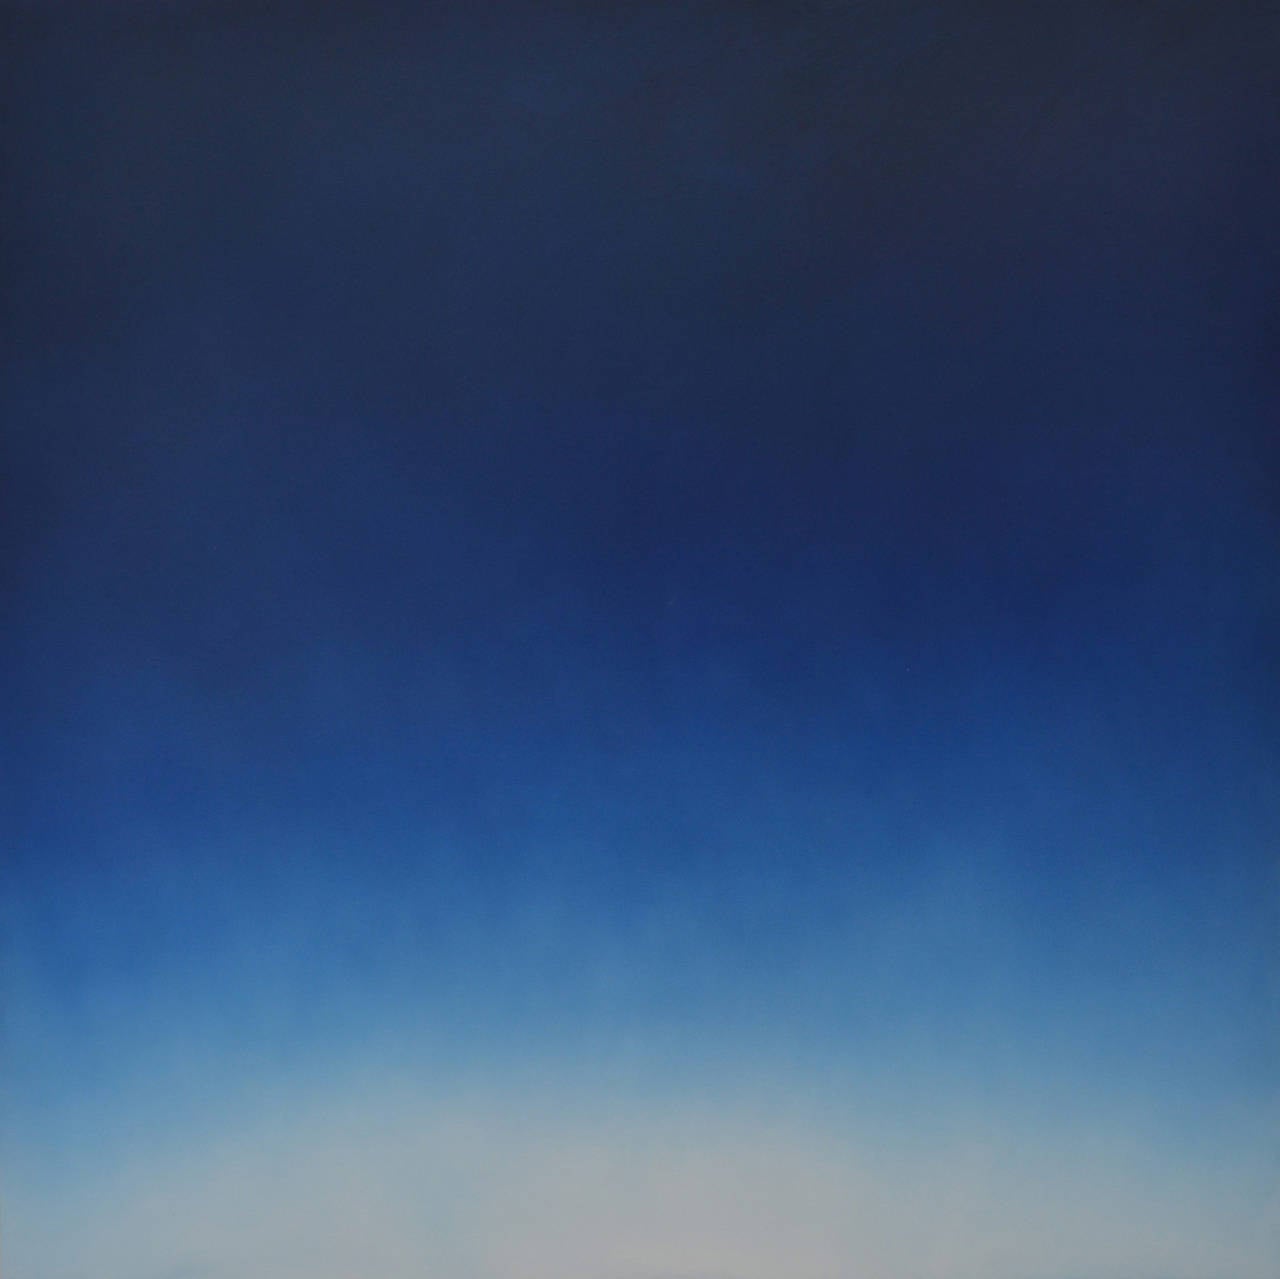 Thought Terrain, Westward Painting 11, 2015
Oil on panel
60 x 60 inches
WE152